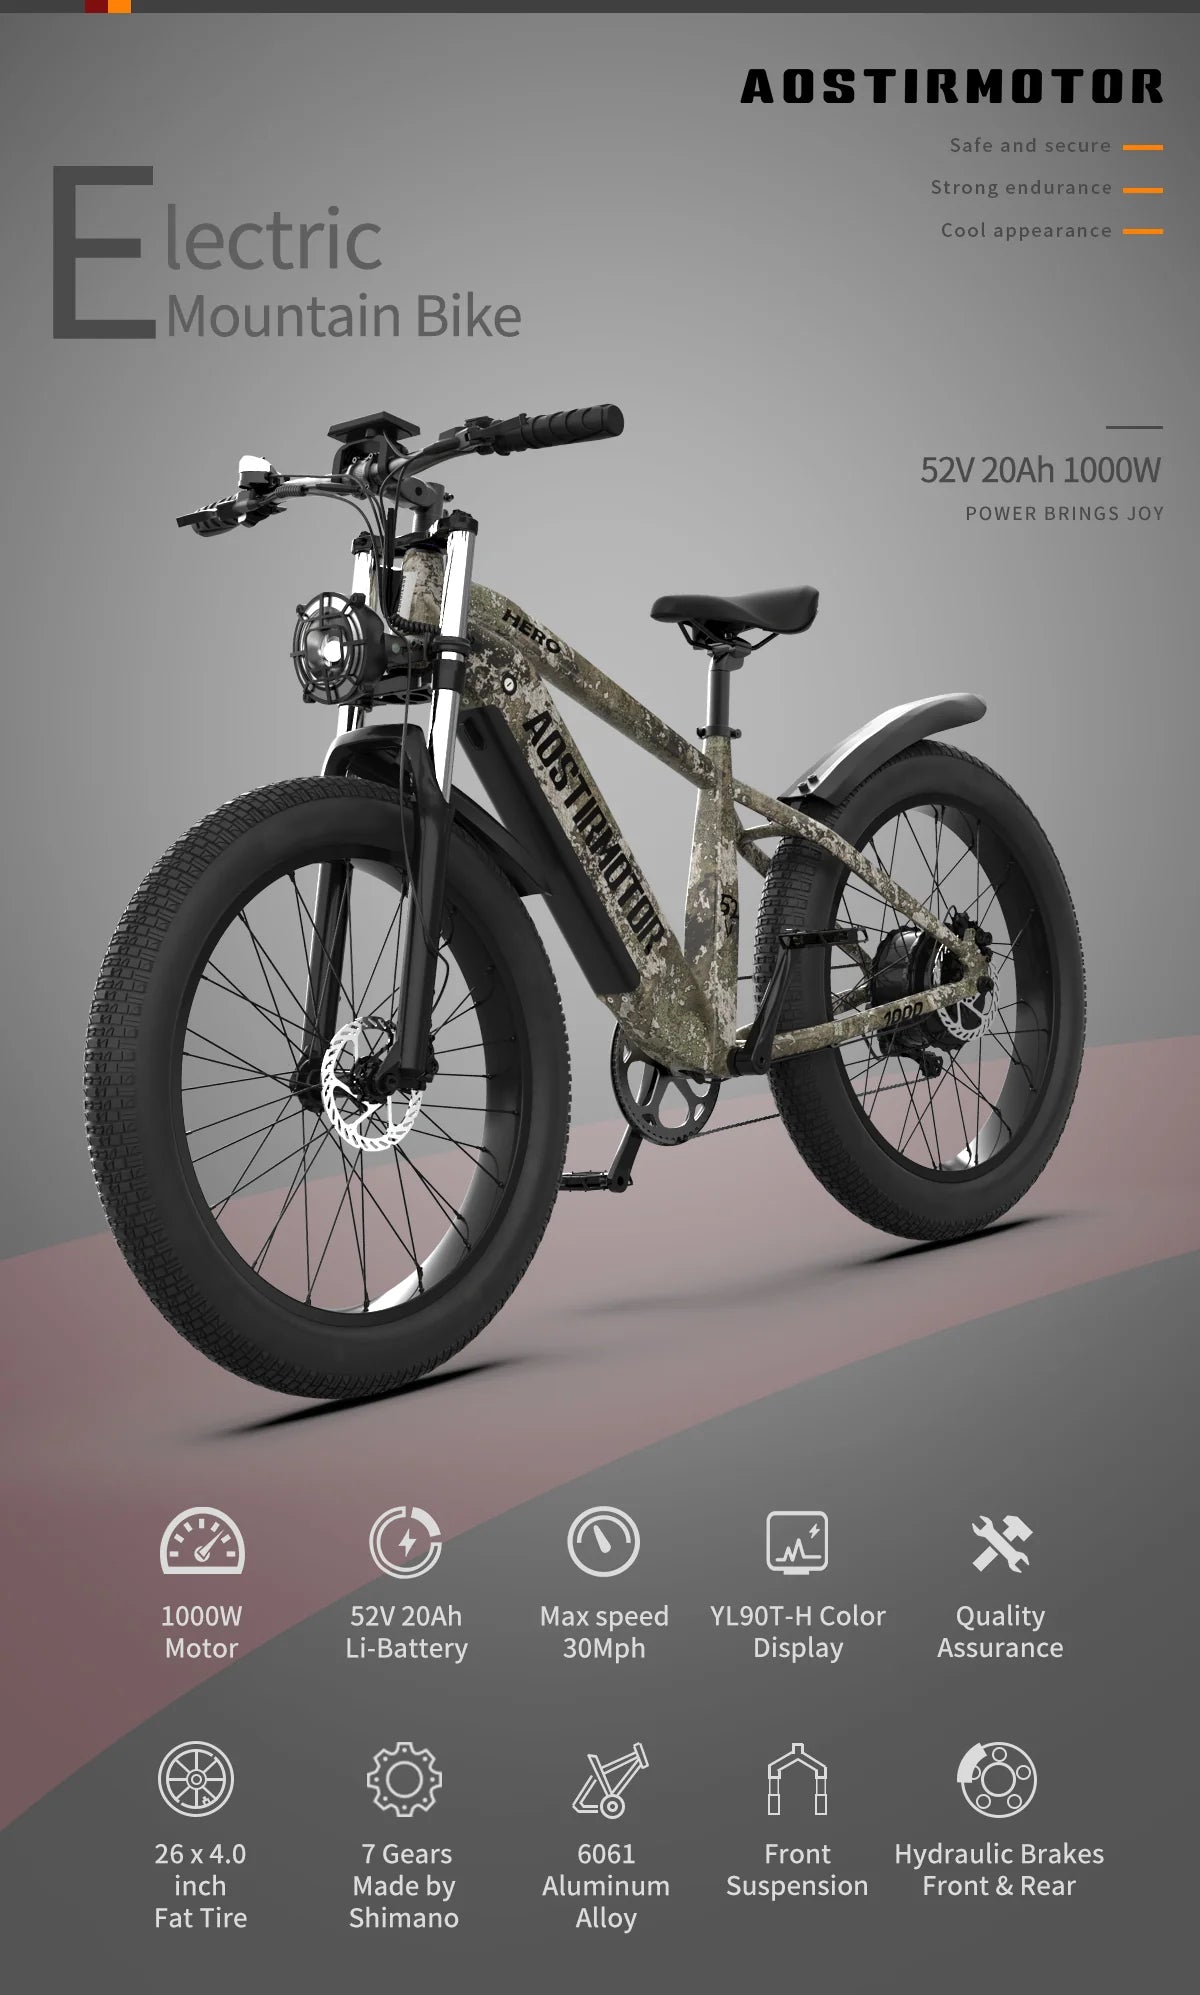 Aostirmotor Hero 1000W 52V Off-Road Fat Tire Electric Bike Specifications